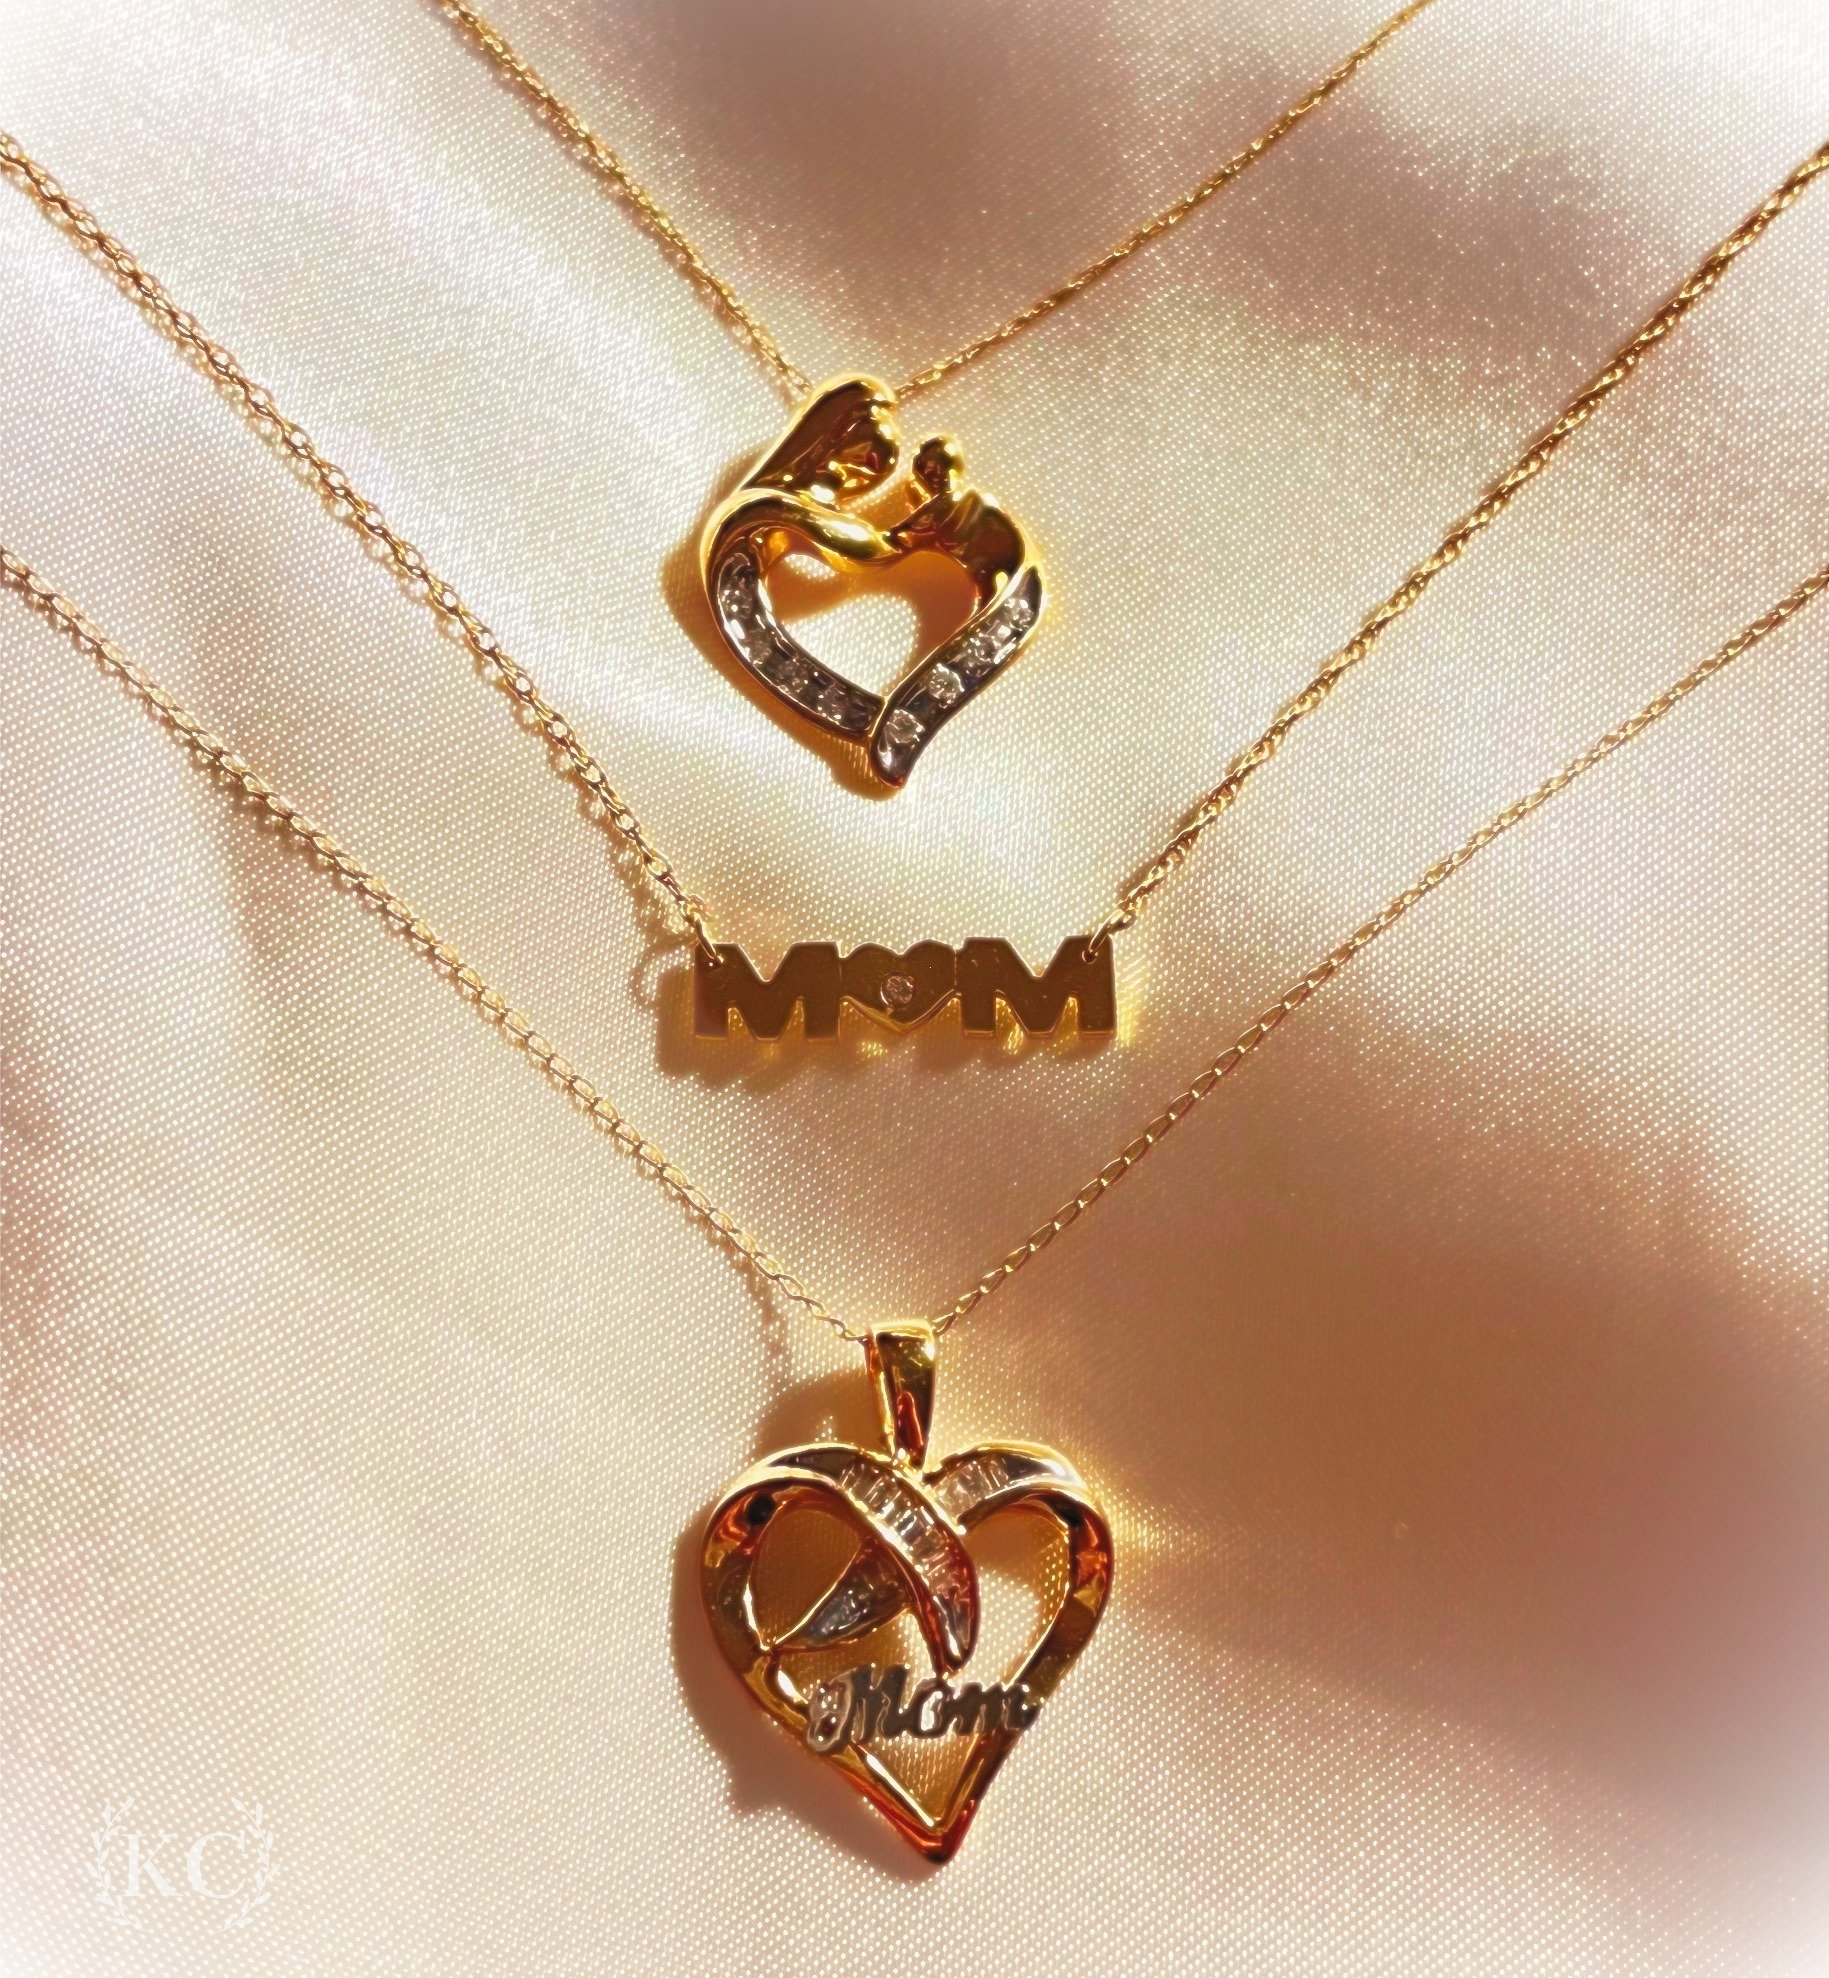 Mother's Day is around the corner! Visit us for exclusive deals on select jewelry pieces, and find the perfect gift to show her just how much she shines!💐✨

#mom #MothersDay #jewelry #Gold